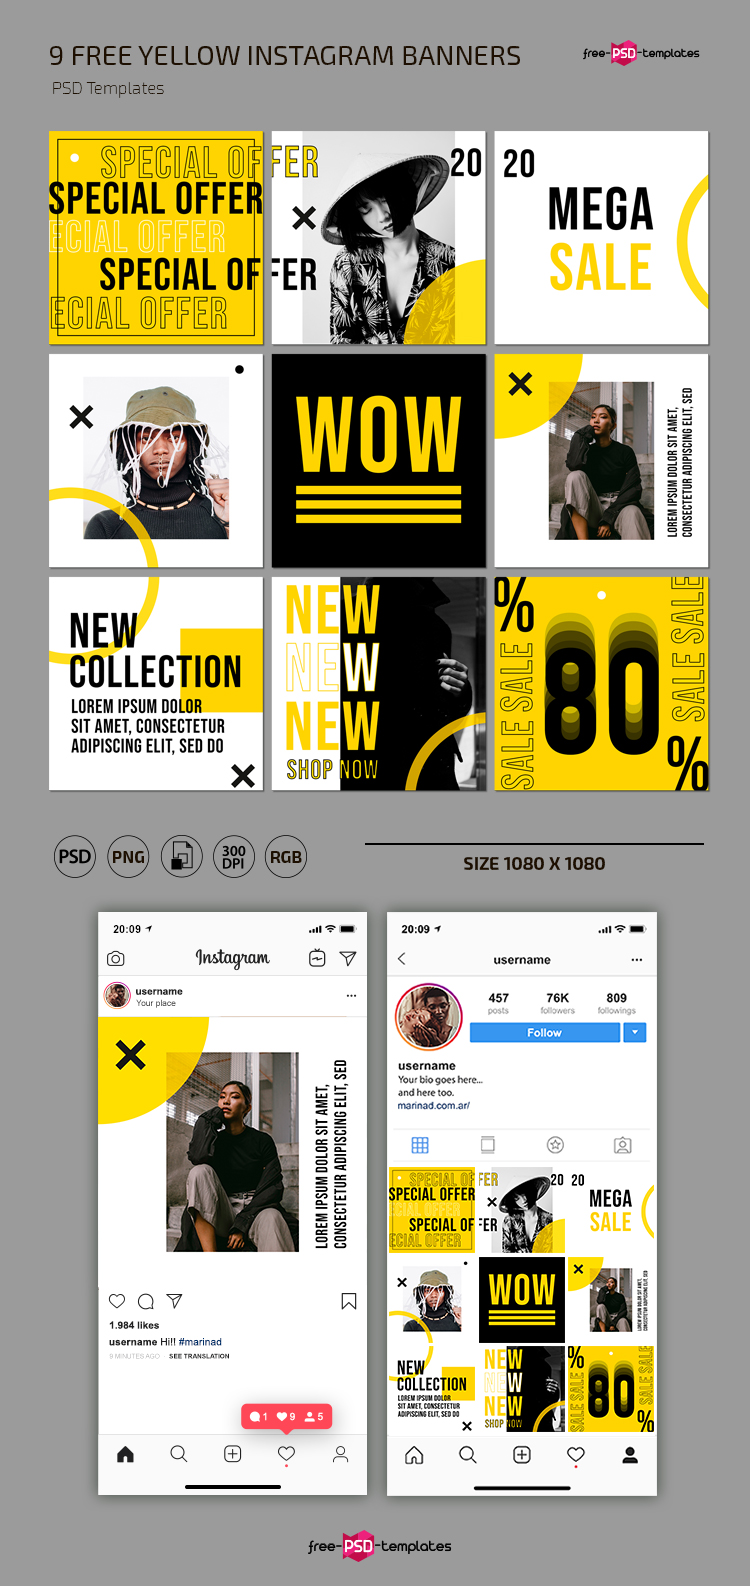 Free Yellow Instagram Posts Template in PSD Free PSD Templates